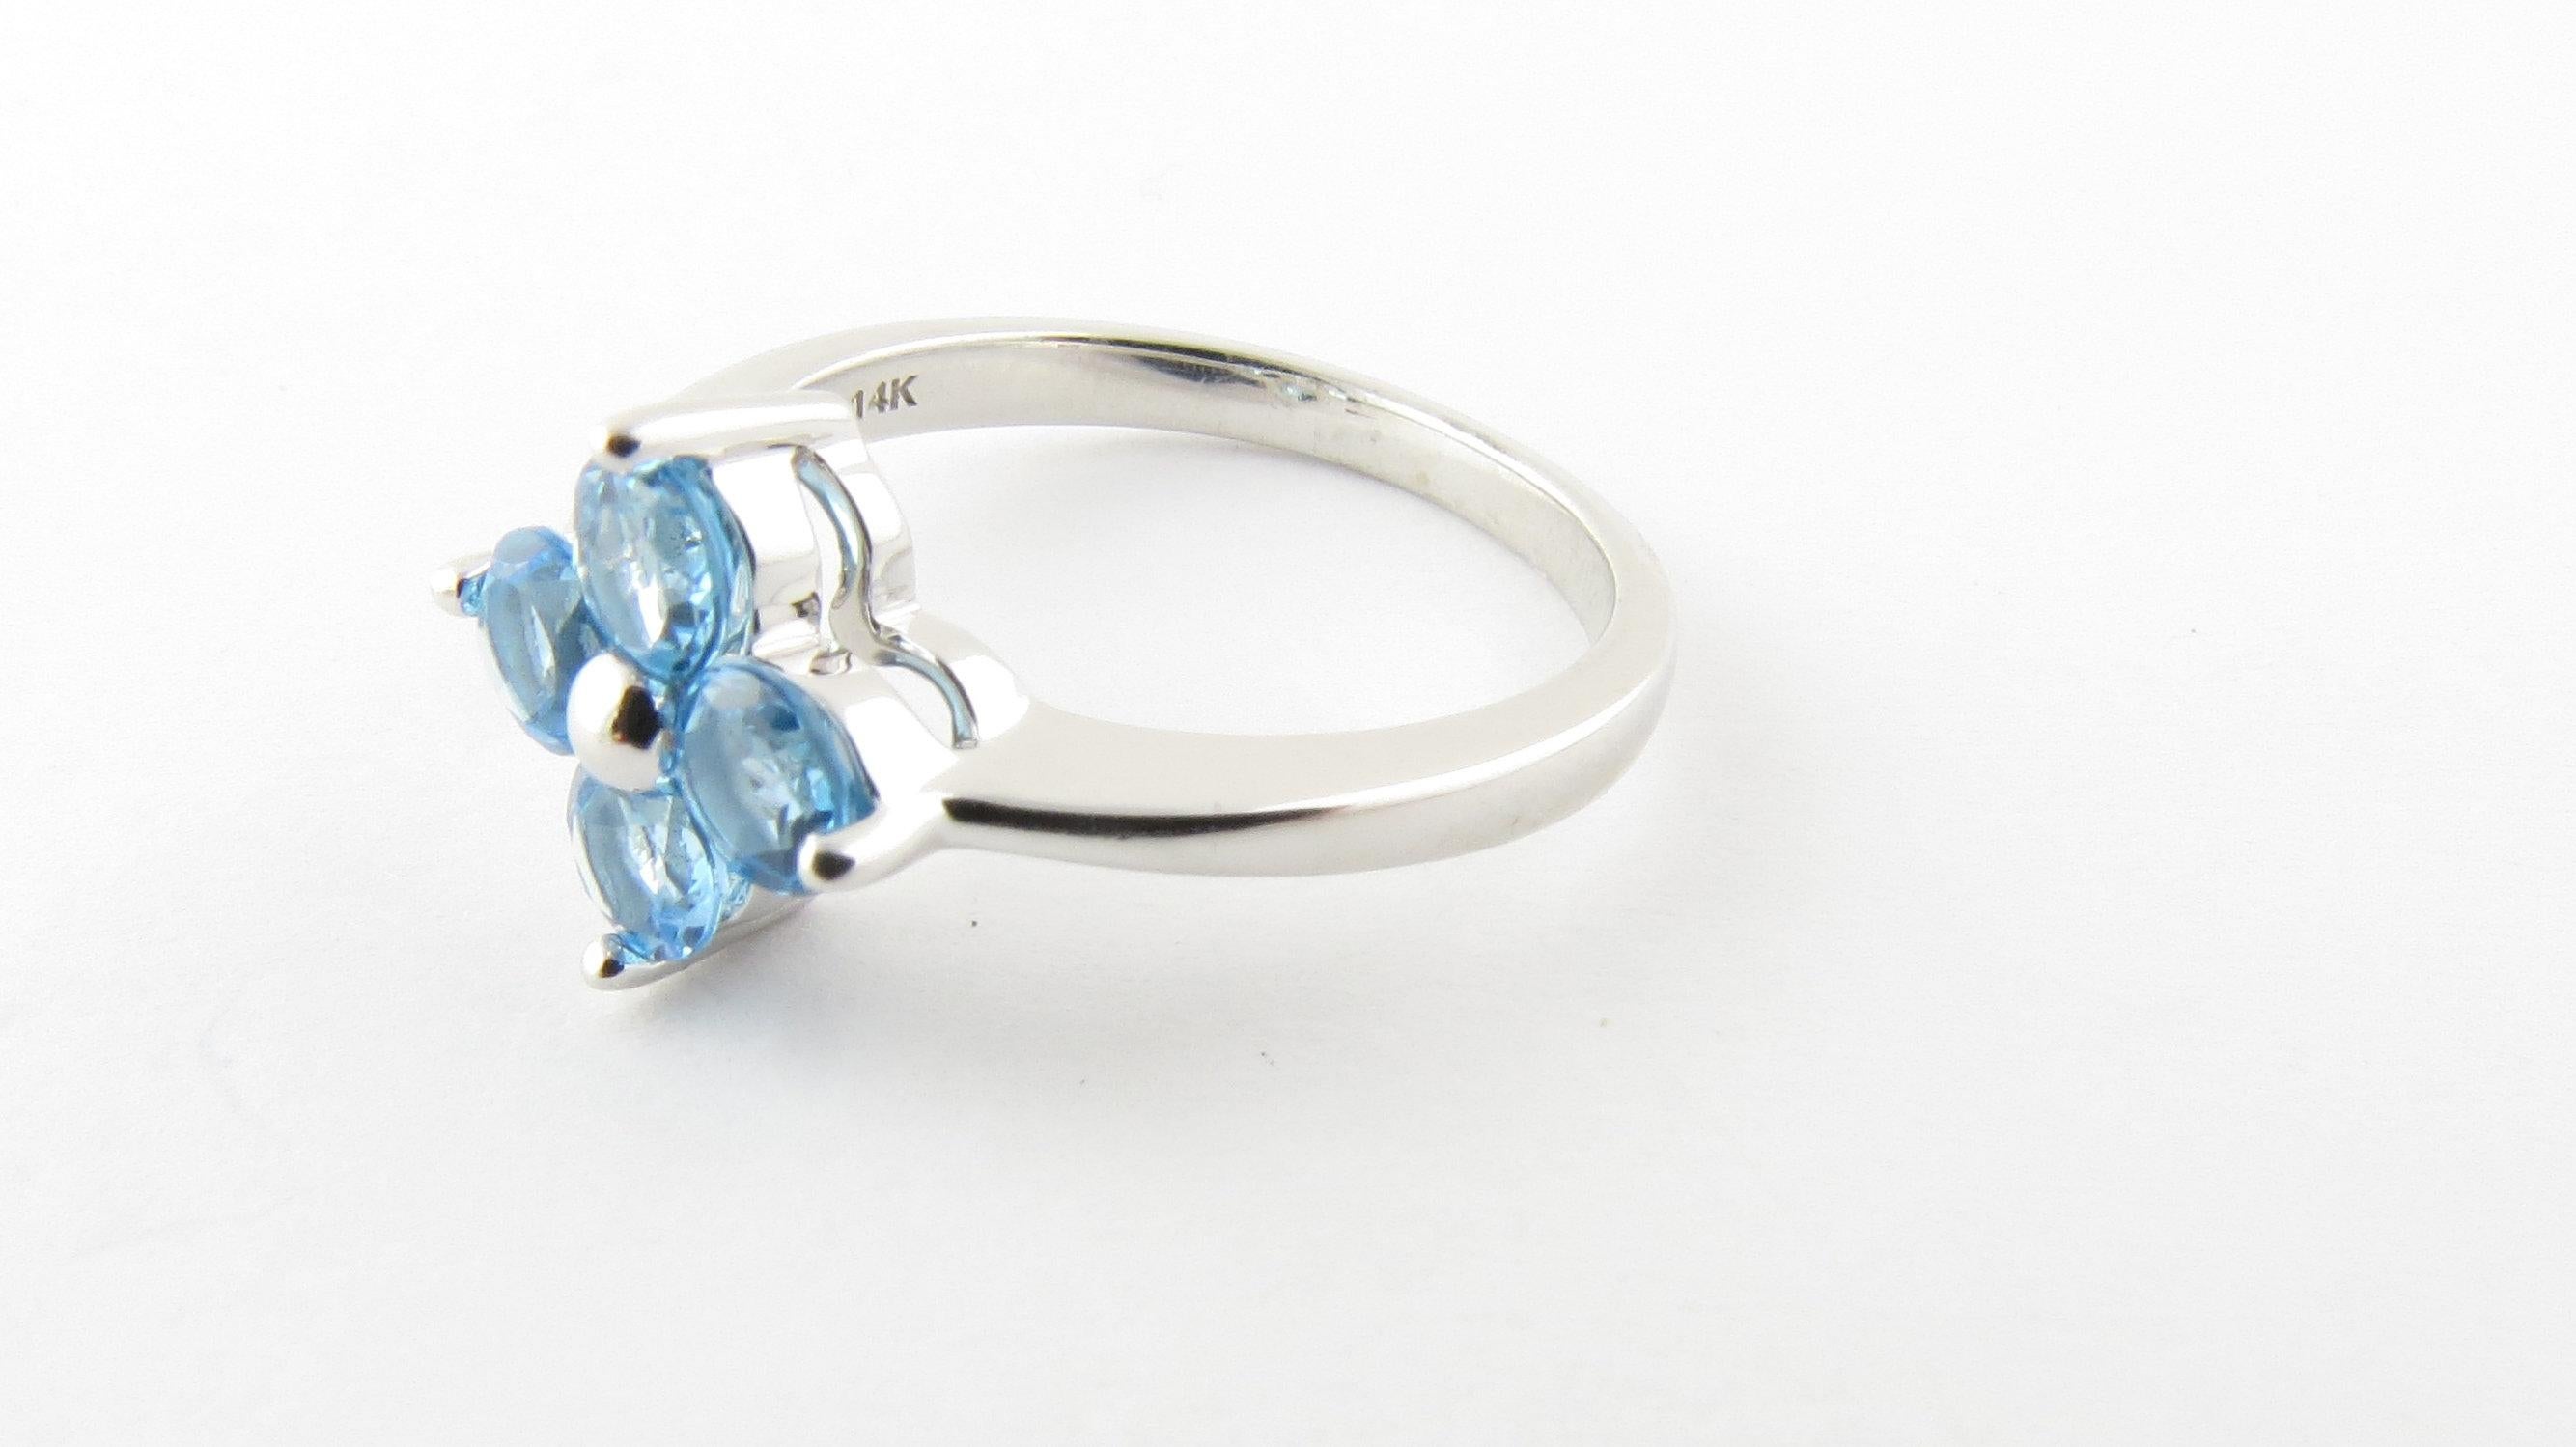 Vintage 14 Karat White Gold Blue Topaz Ring Size 6.75- This lovely ring features four round blue topaz gemstones (4 mm each) set in classic 14K white gold. Top of ring measures 11 mm x 11 mm. Shank measures 2 mm. Ring Size: 6.75 Weight: 2.2 dwt. /